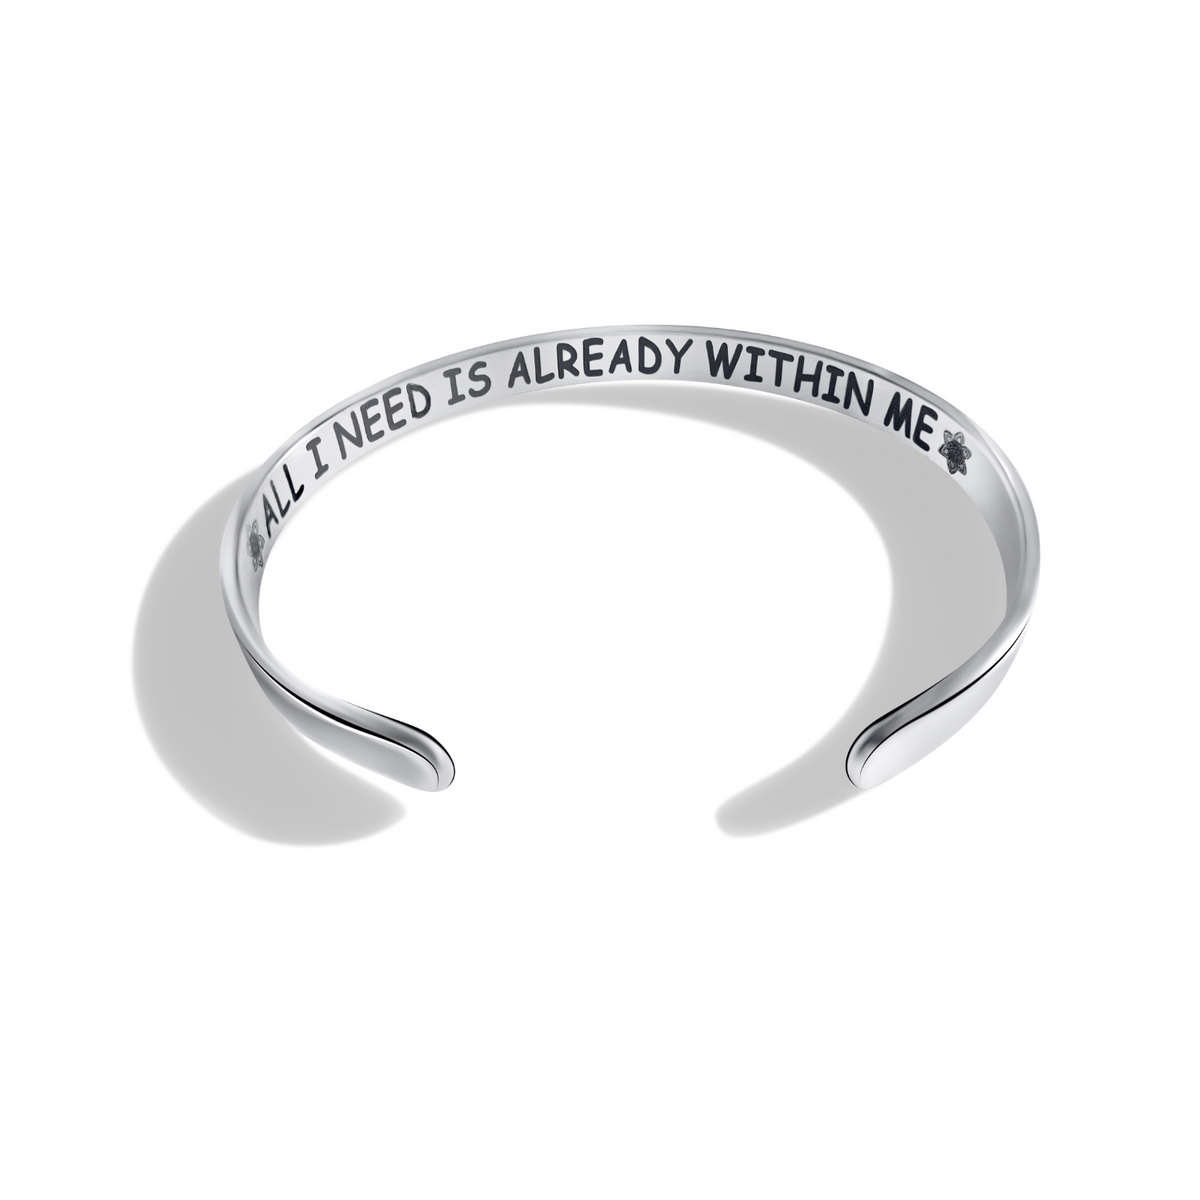 All I Need is Already Within Me (Mantra Cuff)